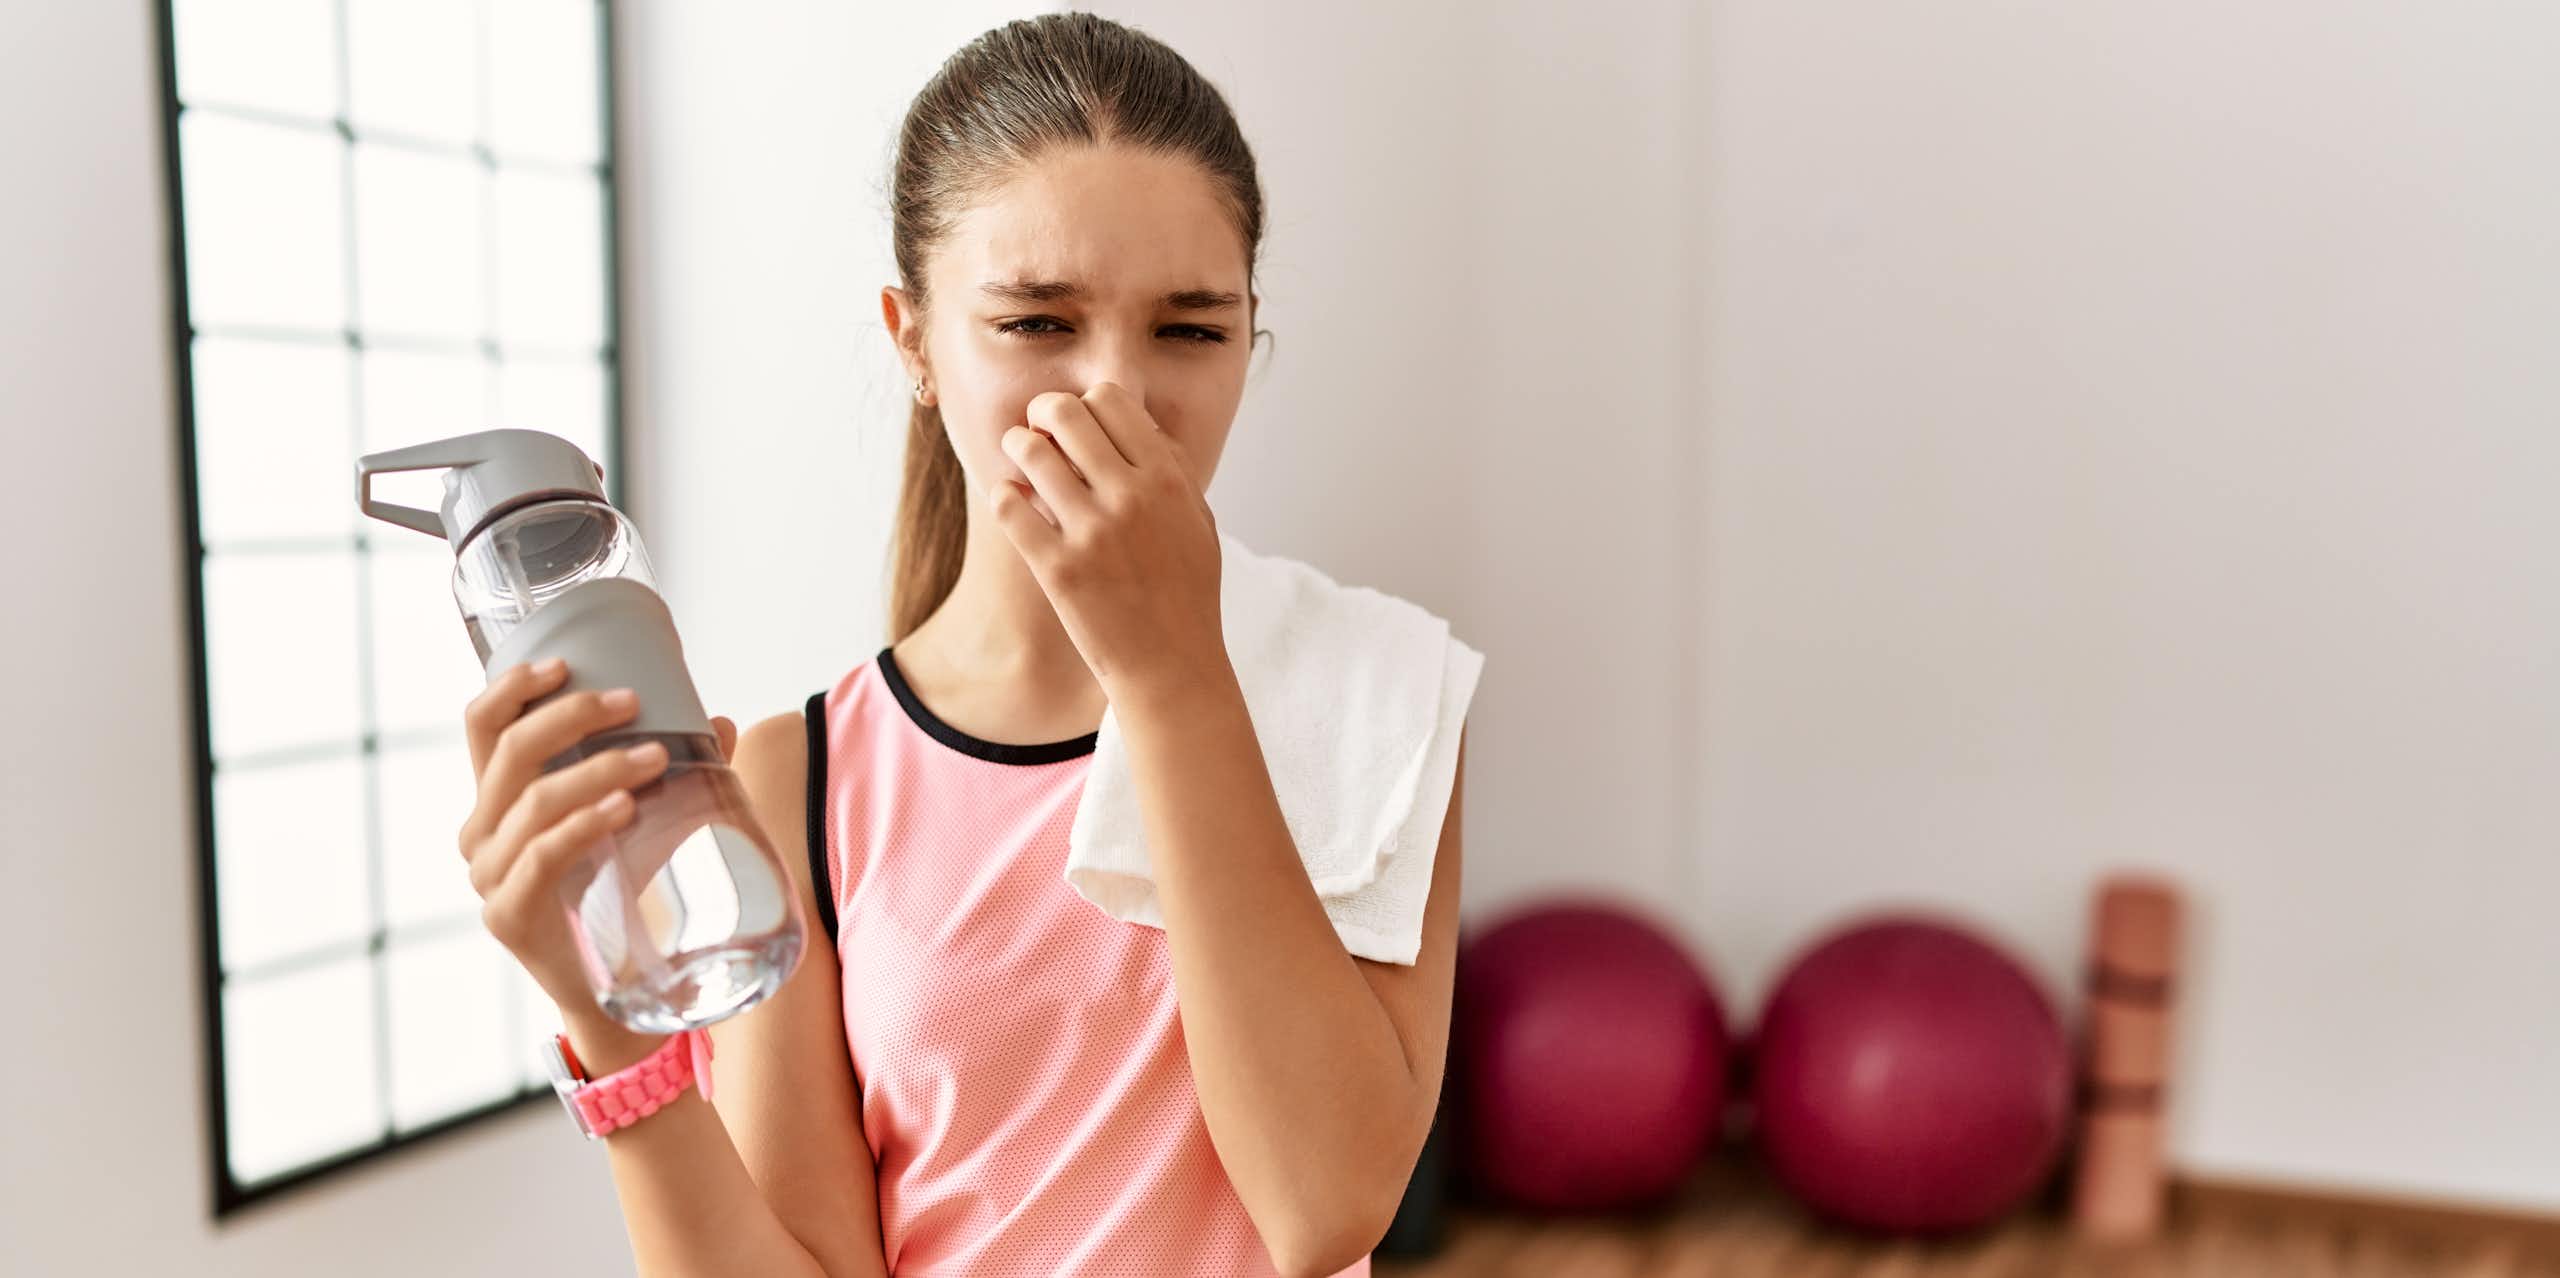 Gym hygiene guide: the dangerous bacteria that lurk in dirty fitness equipment and clothes